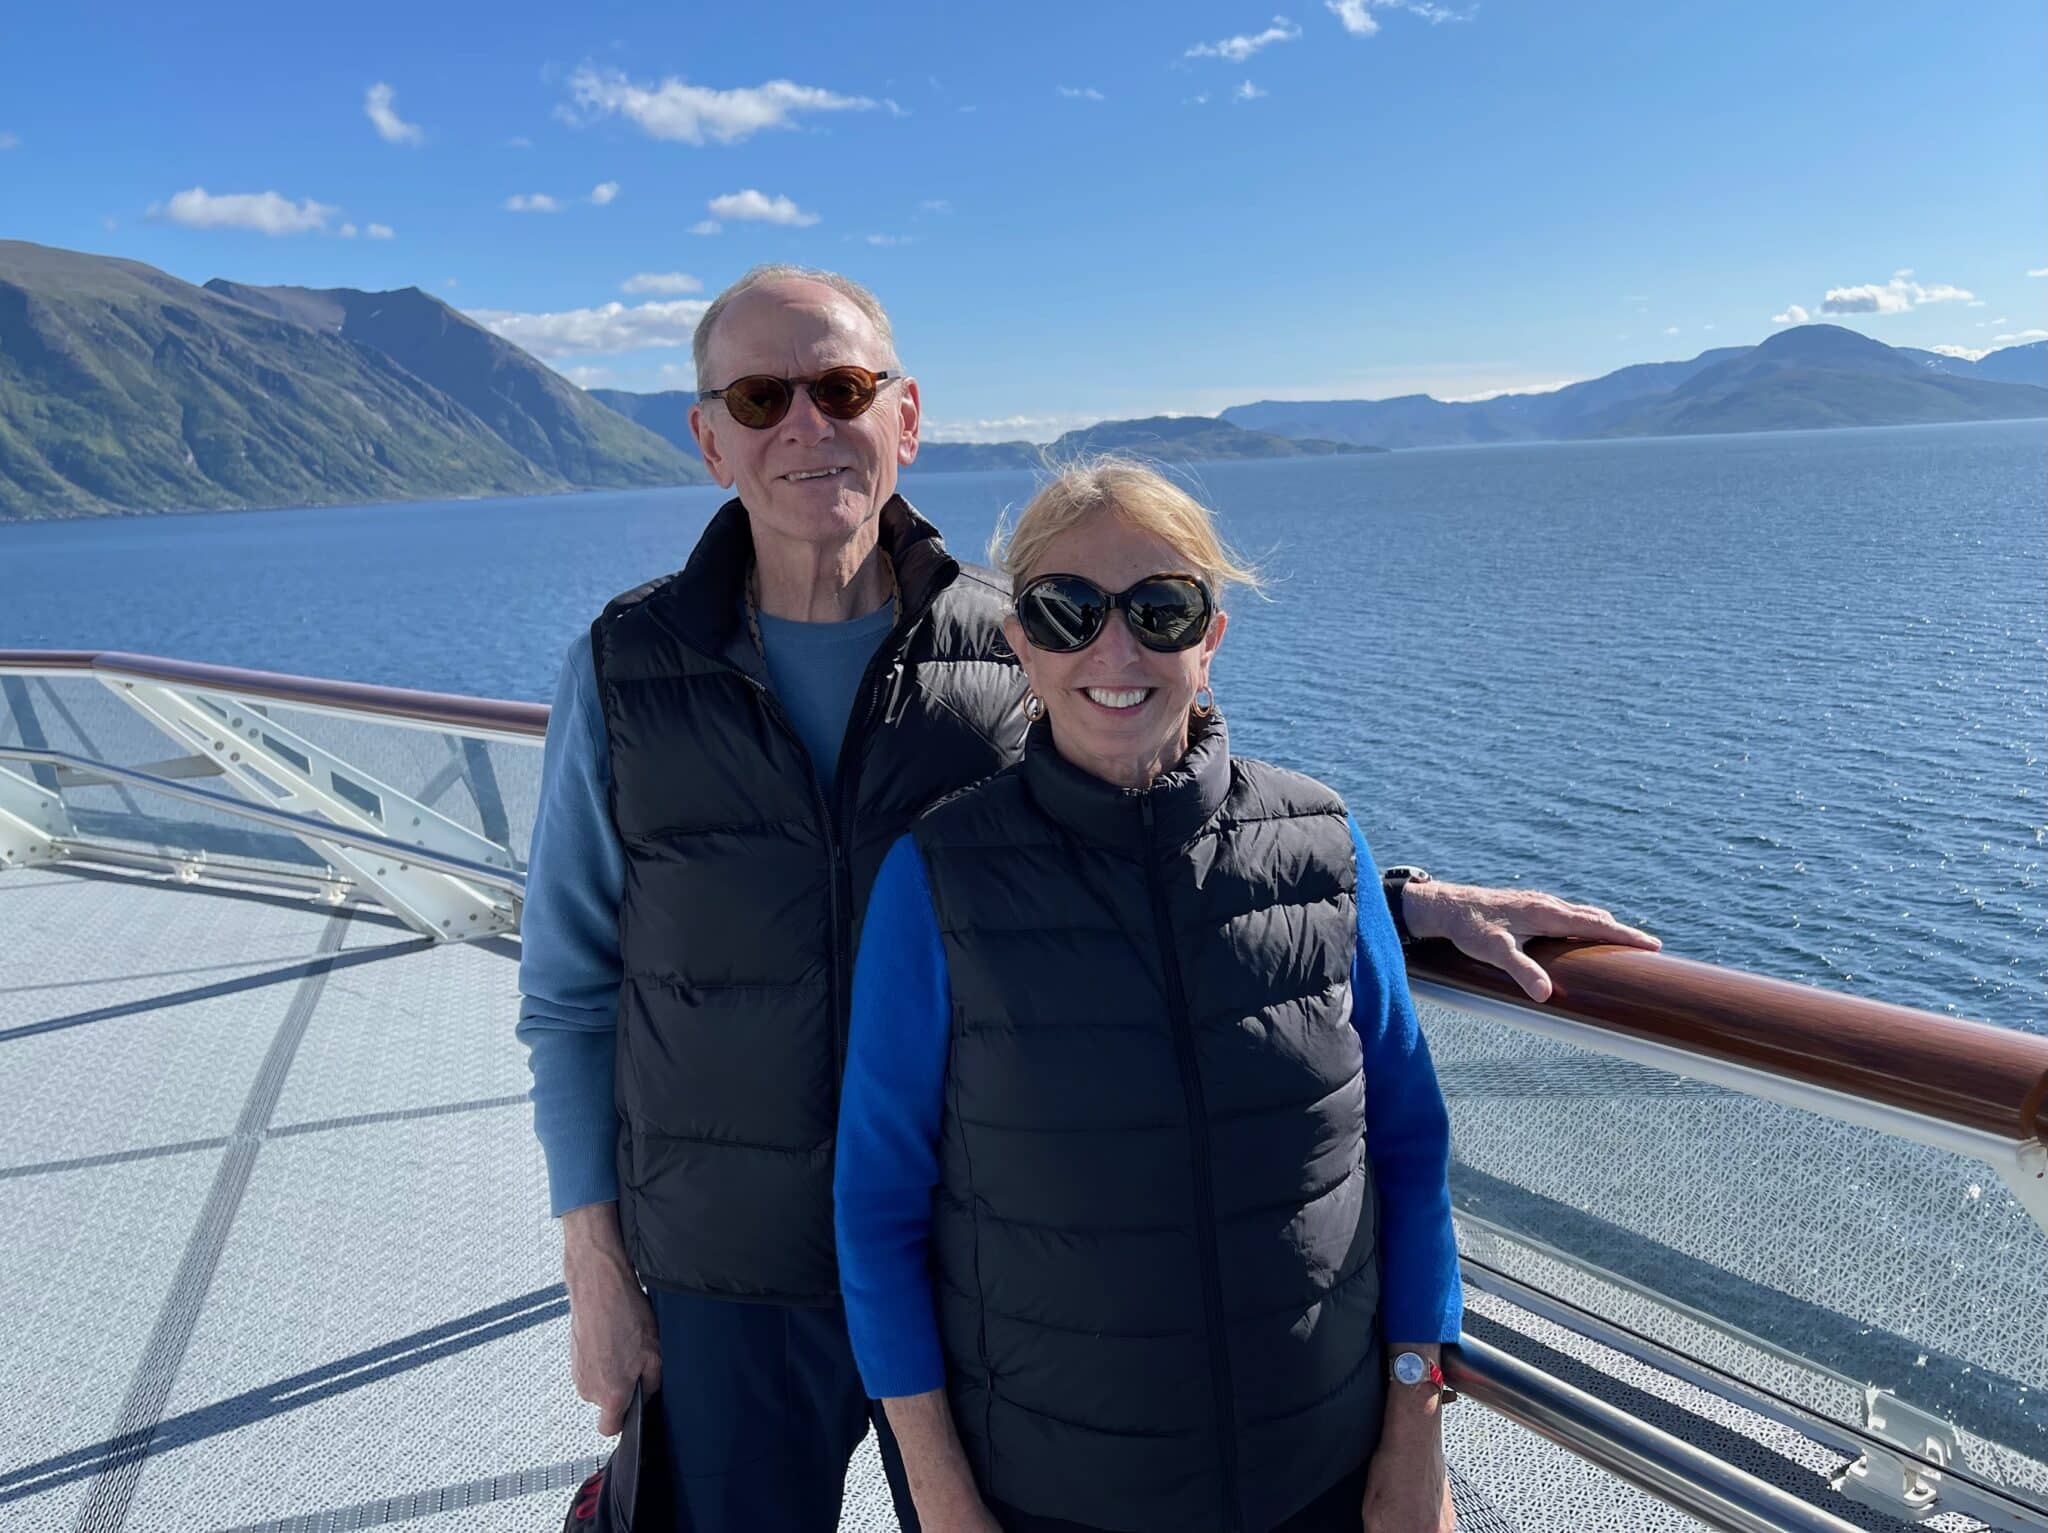 Barbara Nevins Taylor and Nick Taylor in front of Langstrand Island in the Norwegian Fjords